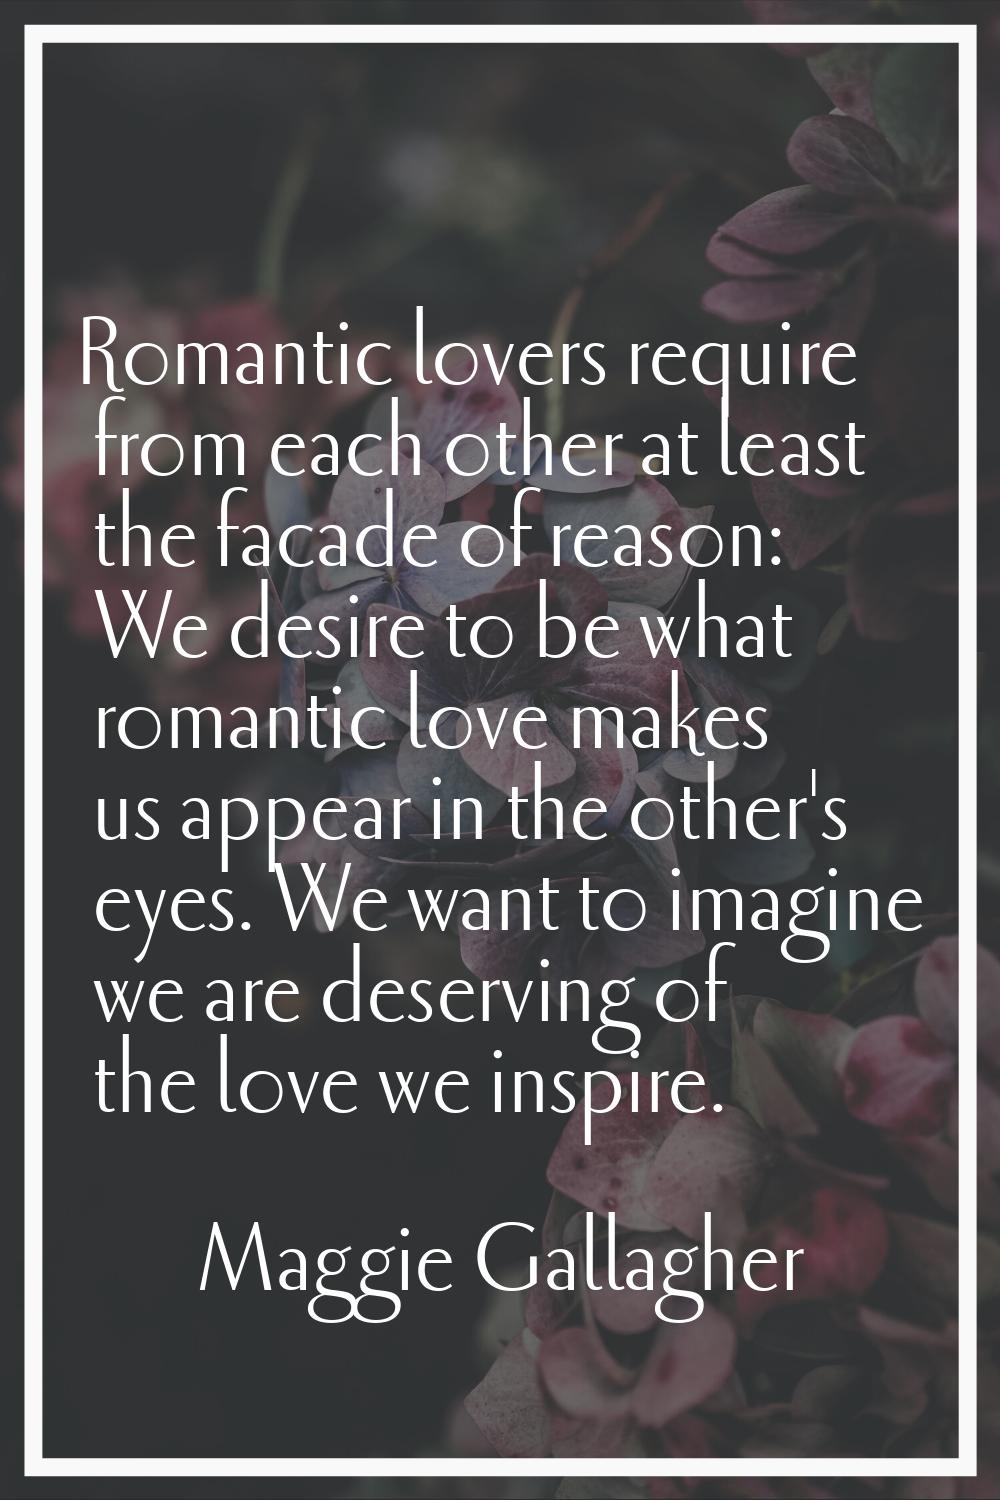 Romantic lovers require from each other at least the facade of reason: We desire to be what romanti